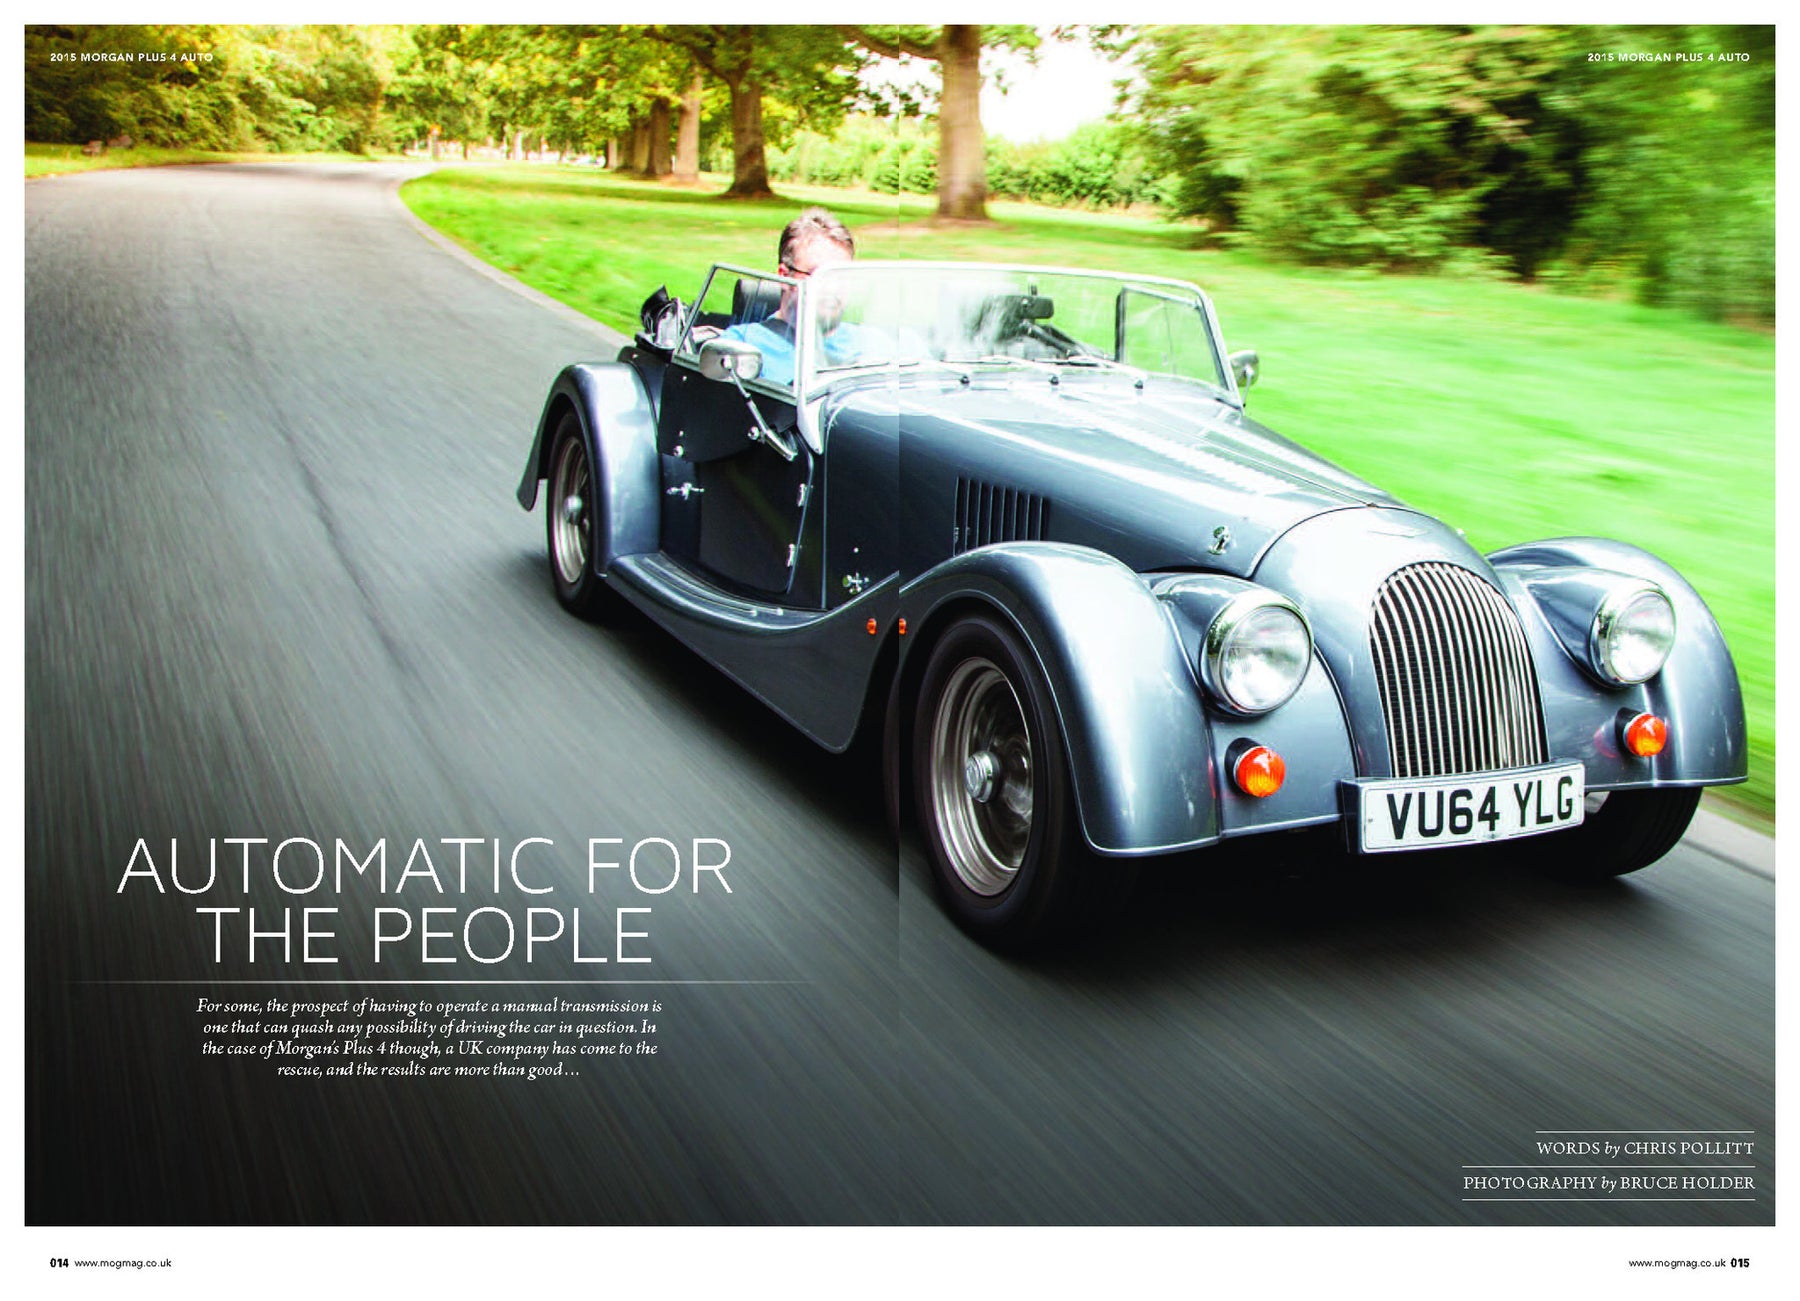 Automatic For The People – Morgan Plus 4 Automatic